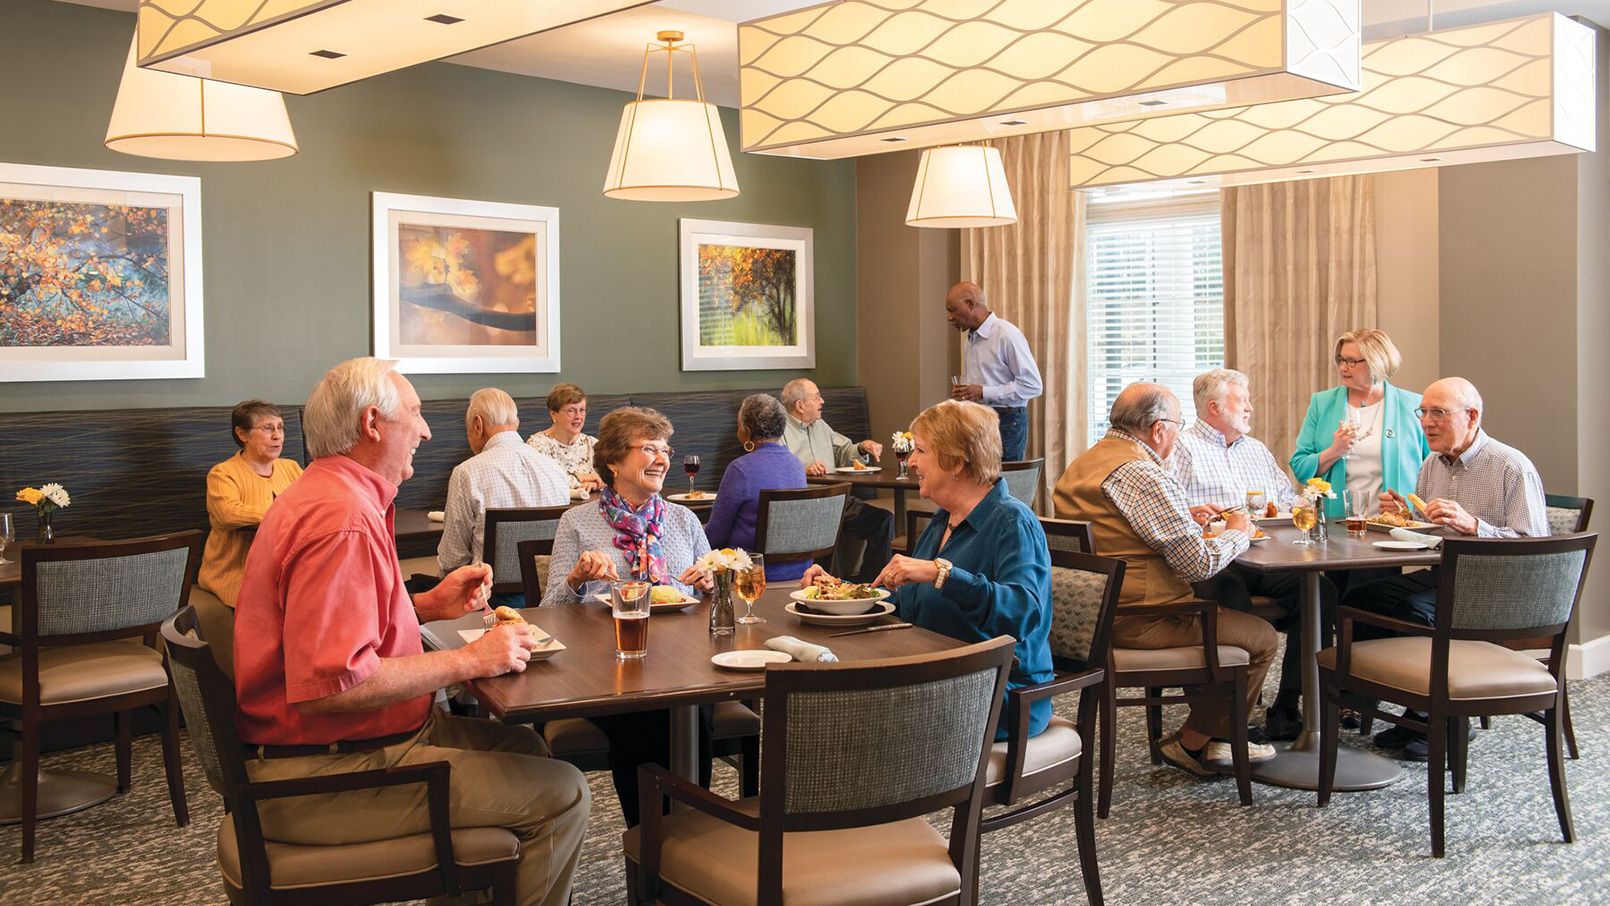 Community residents enjoying lively conversation while dining in community restaurant